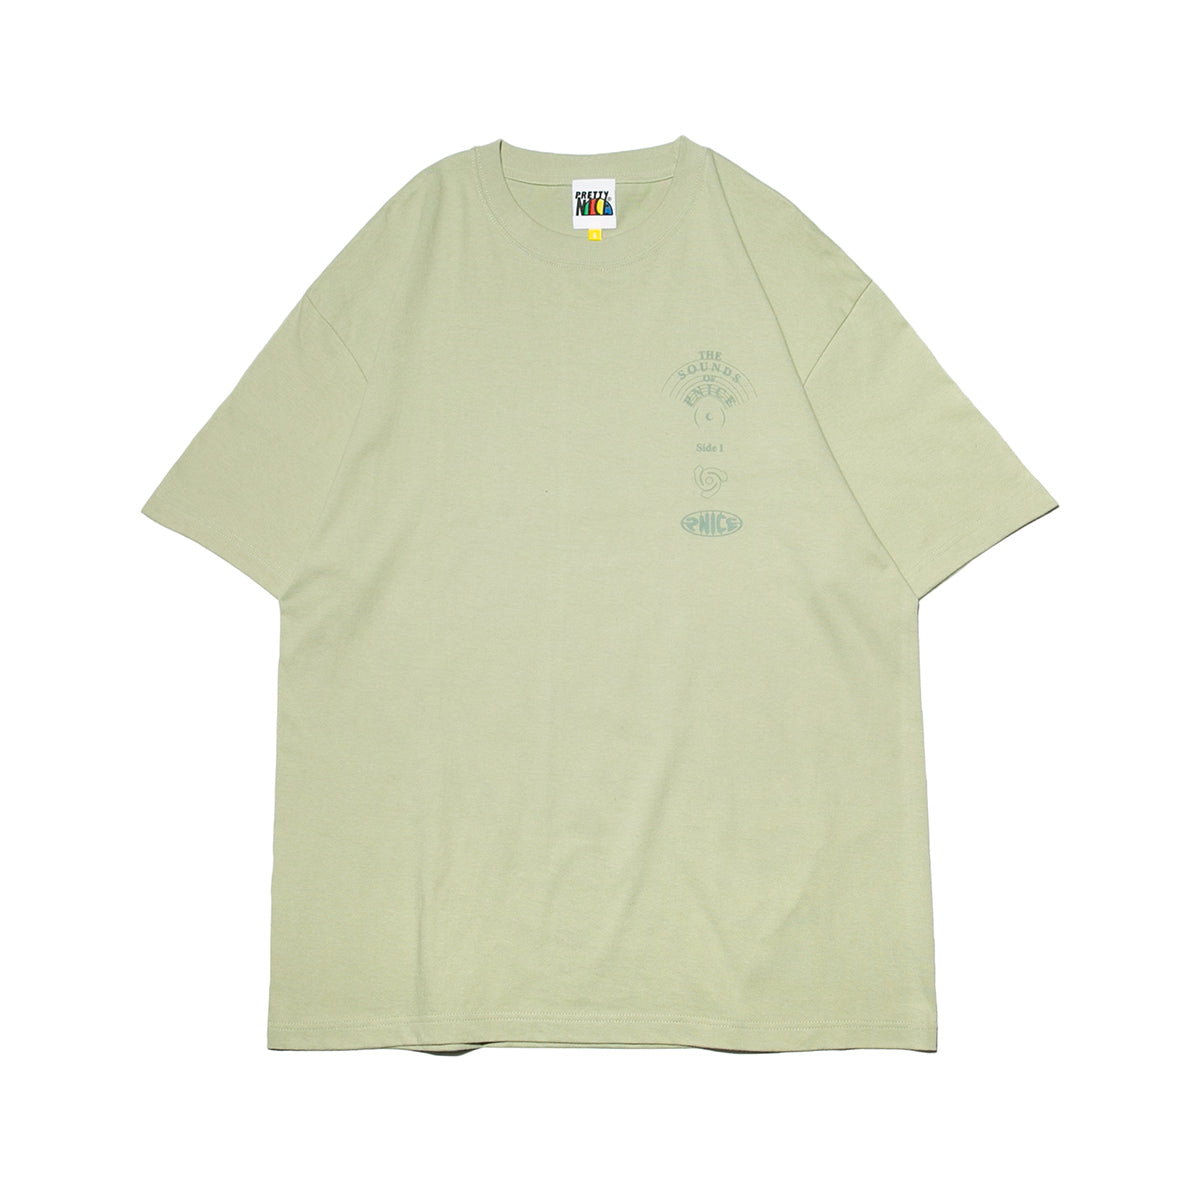 Voyager Golden Record Tee-Sage Green